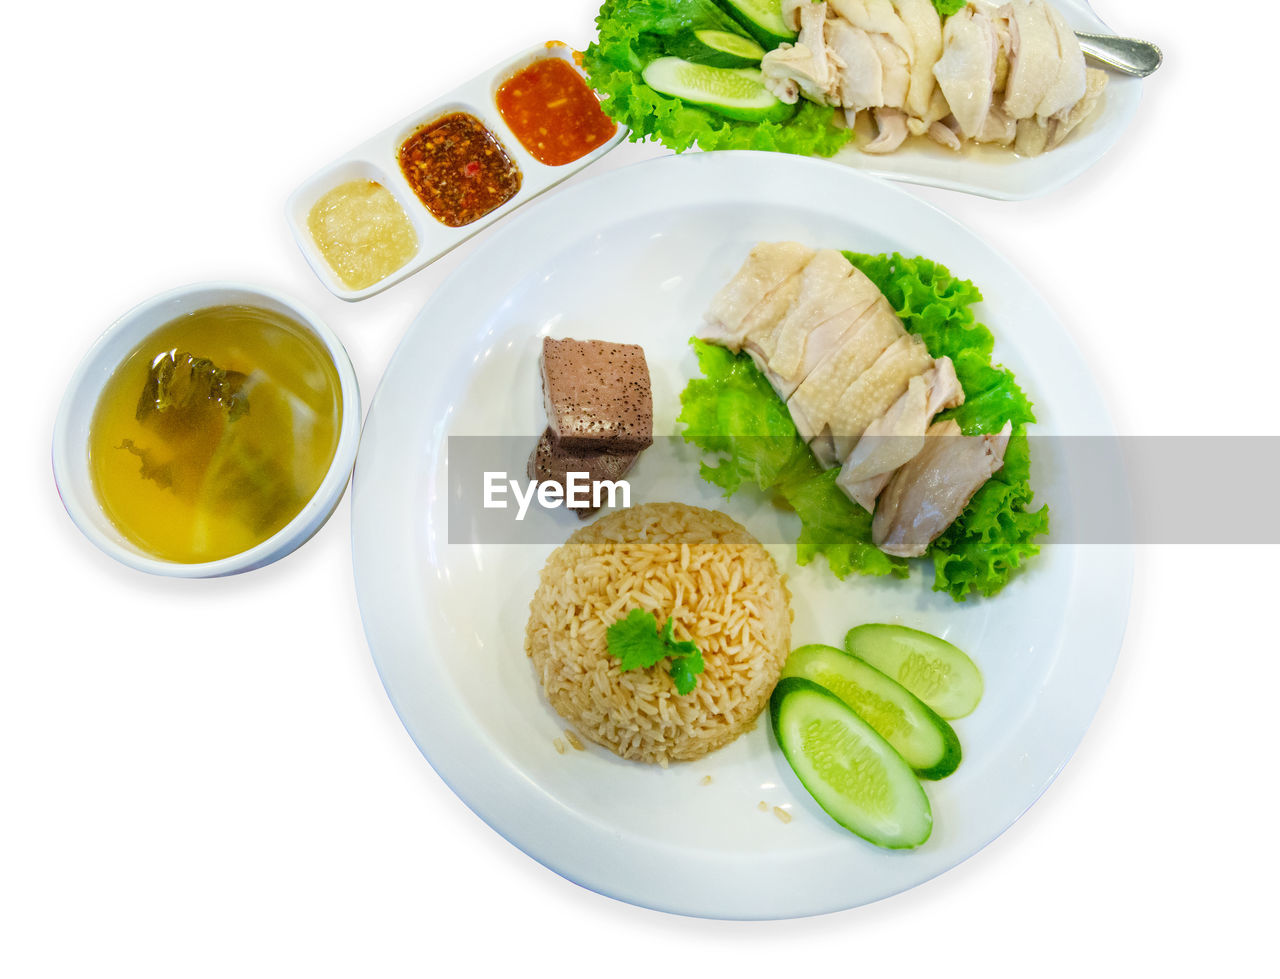 food, food and drink, healthy eating, vegetable, freshness, wellbeing, dish, plate, fish, cuisine, meal, fruit, seafood, produce, no people, meat, cucumber, indoors, white background, asian food, high angle view, studio shot, slice, lunch, rice - food staple, dinner, savory food, appetizer, serving size, sauce